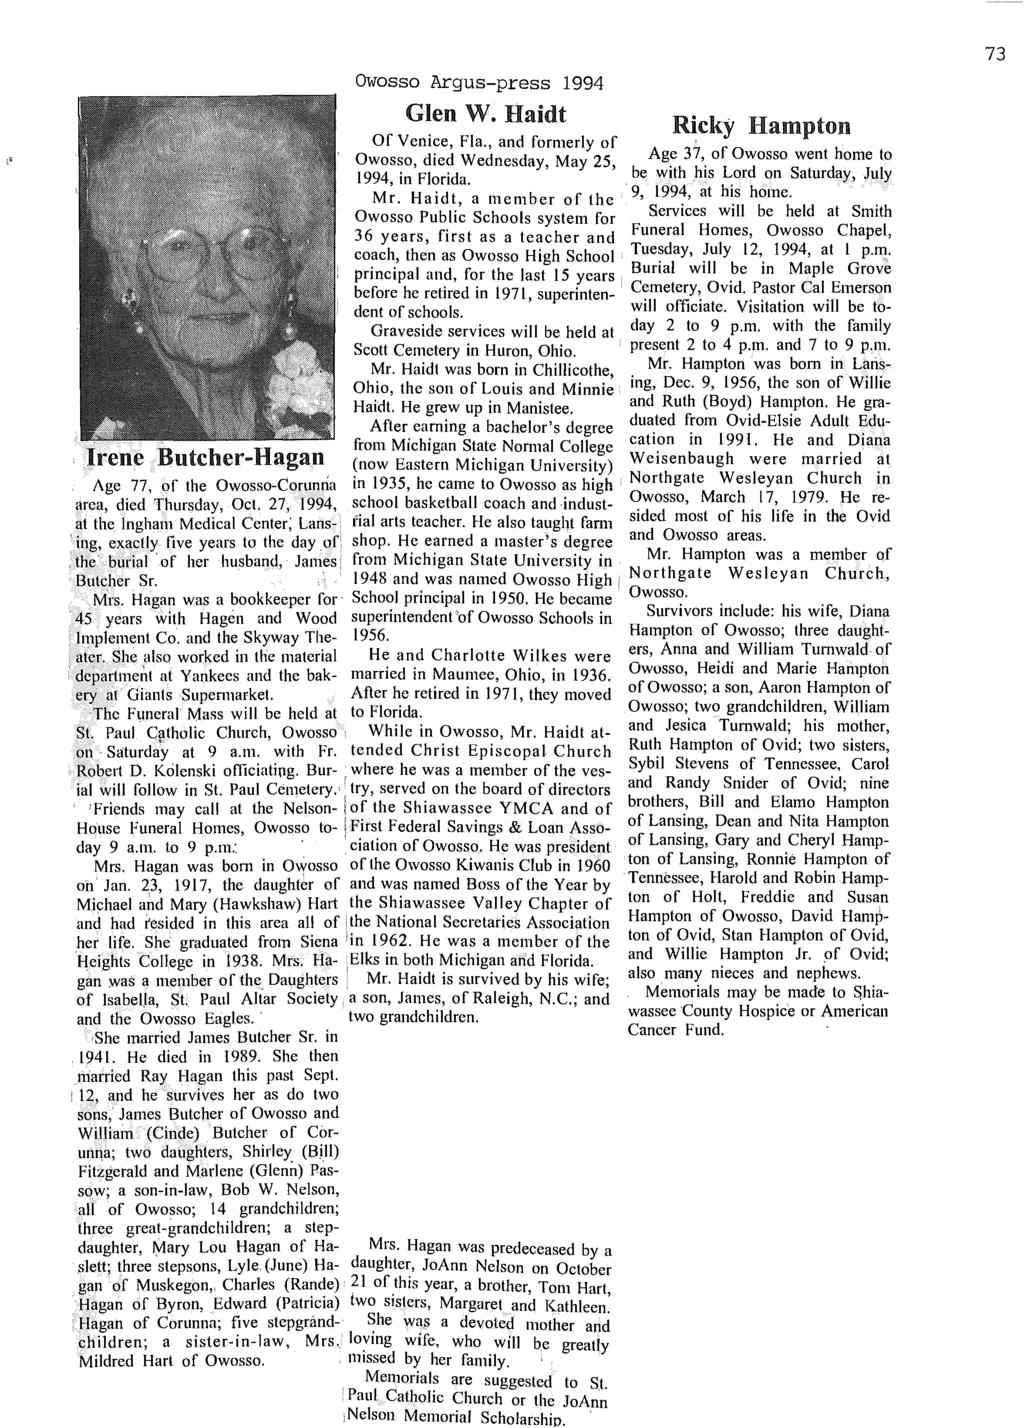 Owosso Argus-press 1994 Glen W. Haidt ~cky Hampton Of Venice, Fla., and formerly of Owosso, died Wednesday, May 25 Age 37, of Owosso went home to 1994, in Florida.